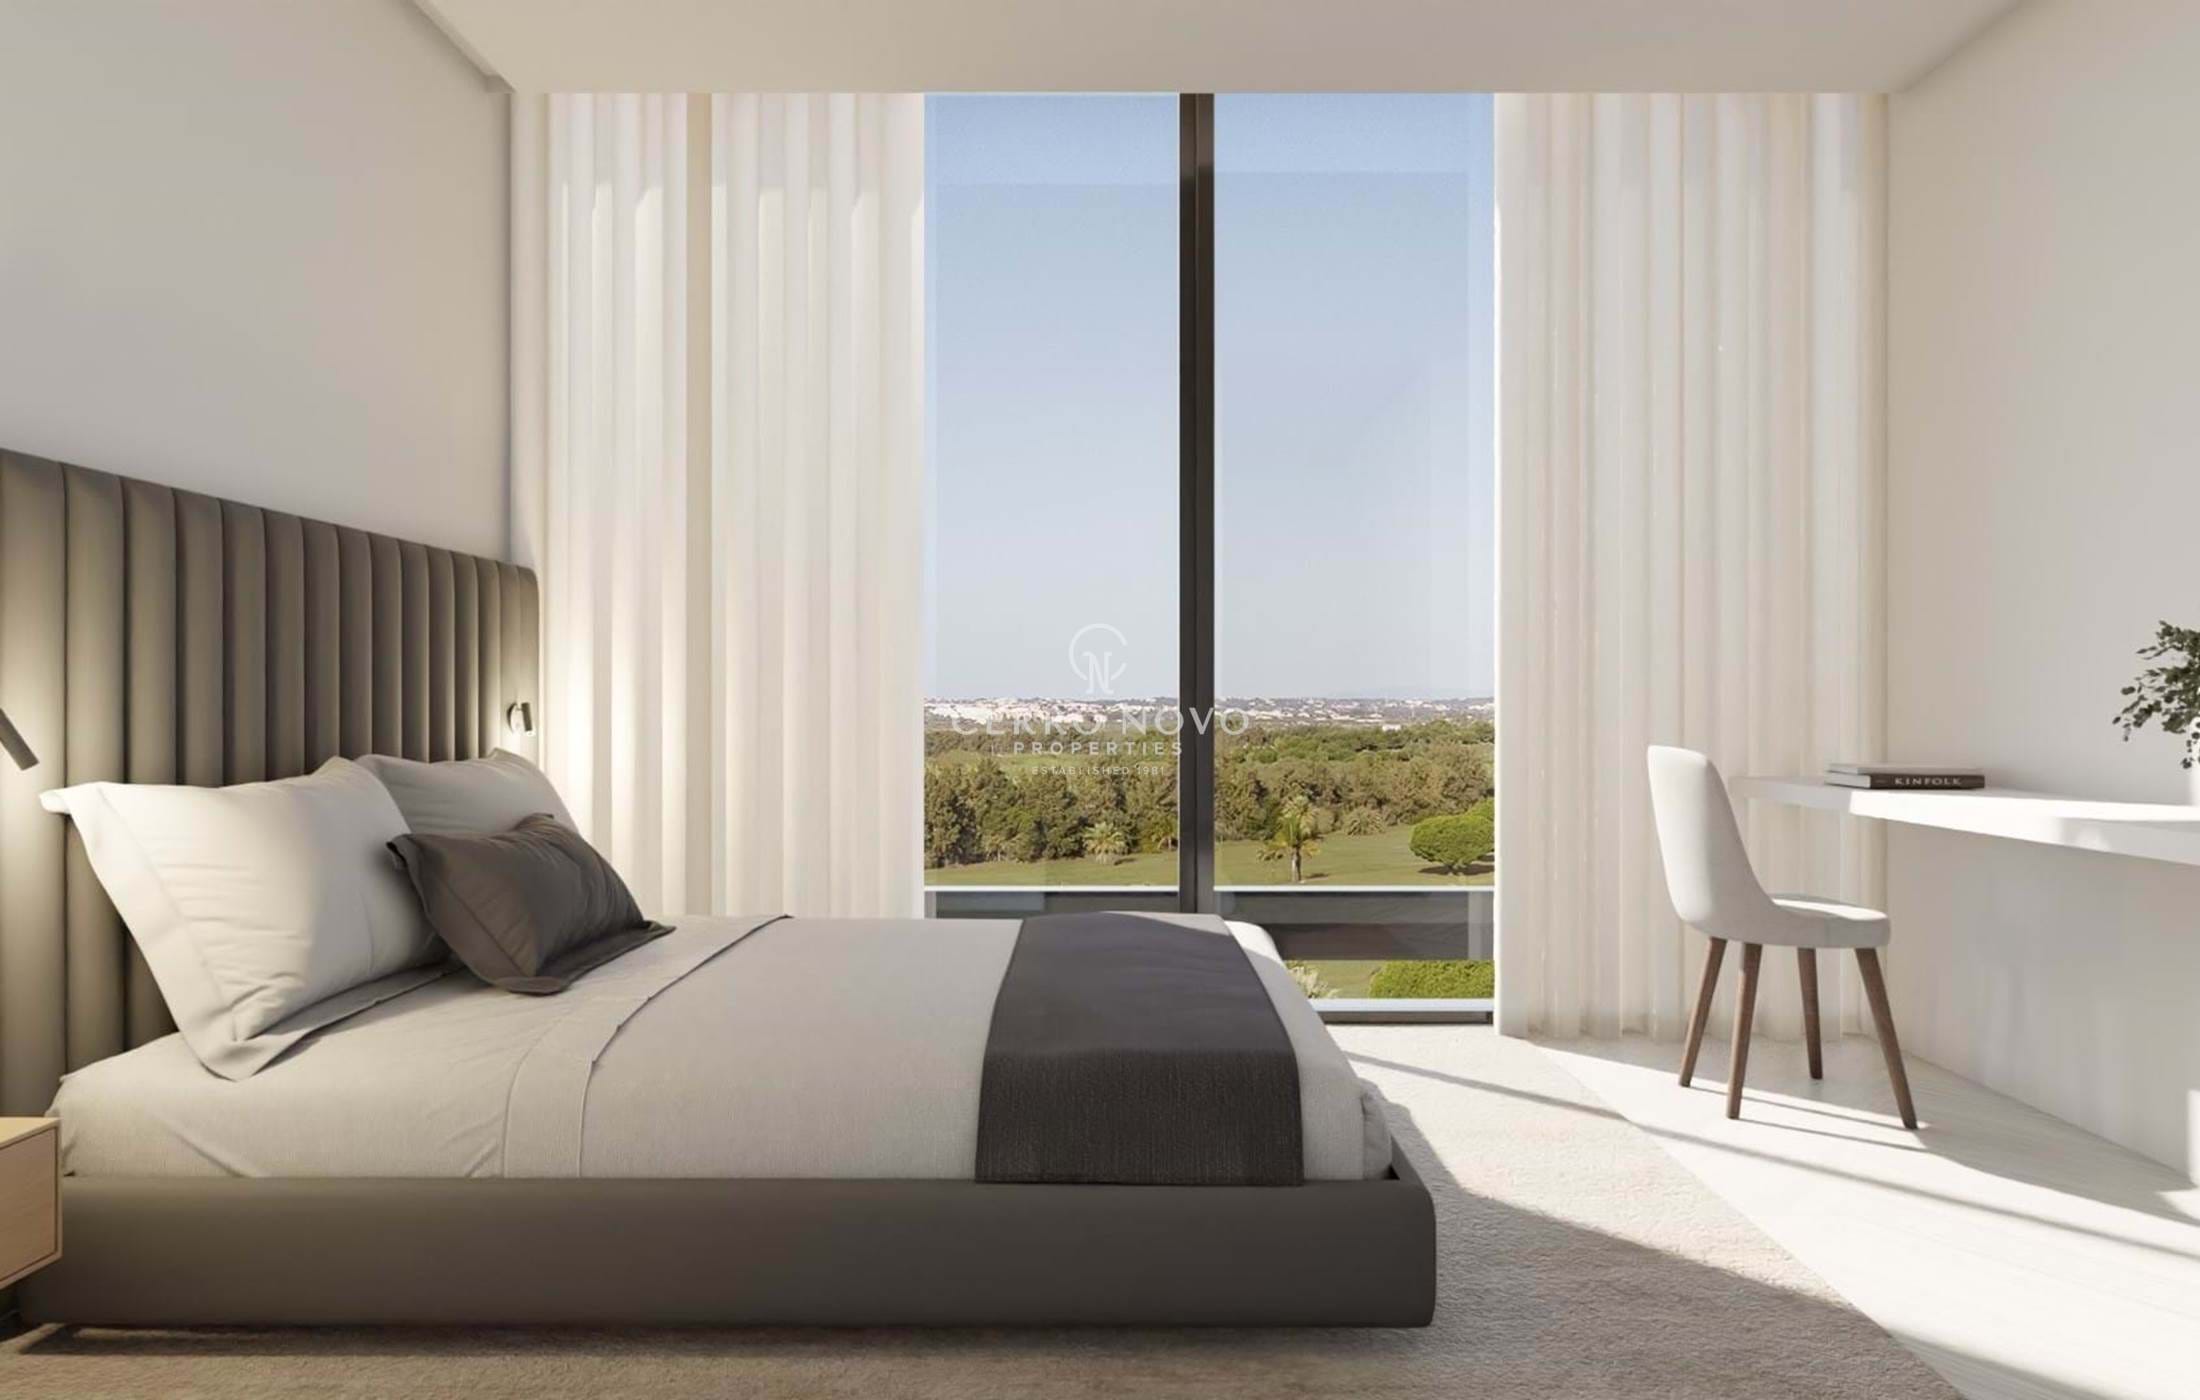 A unique, luxury apartment development in the heart of Vilamoura's golf courses and waterways.